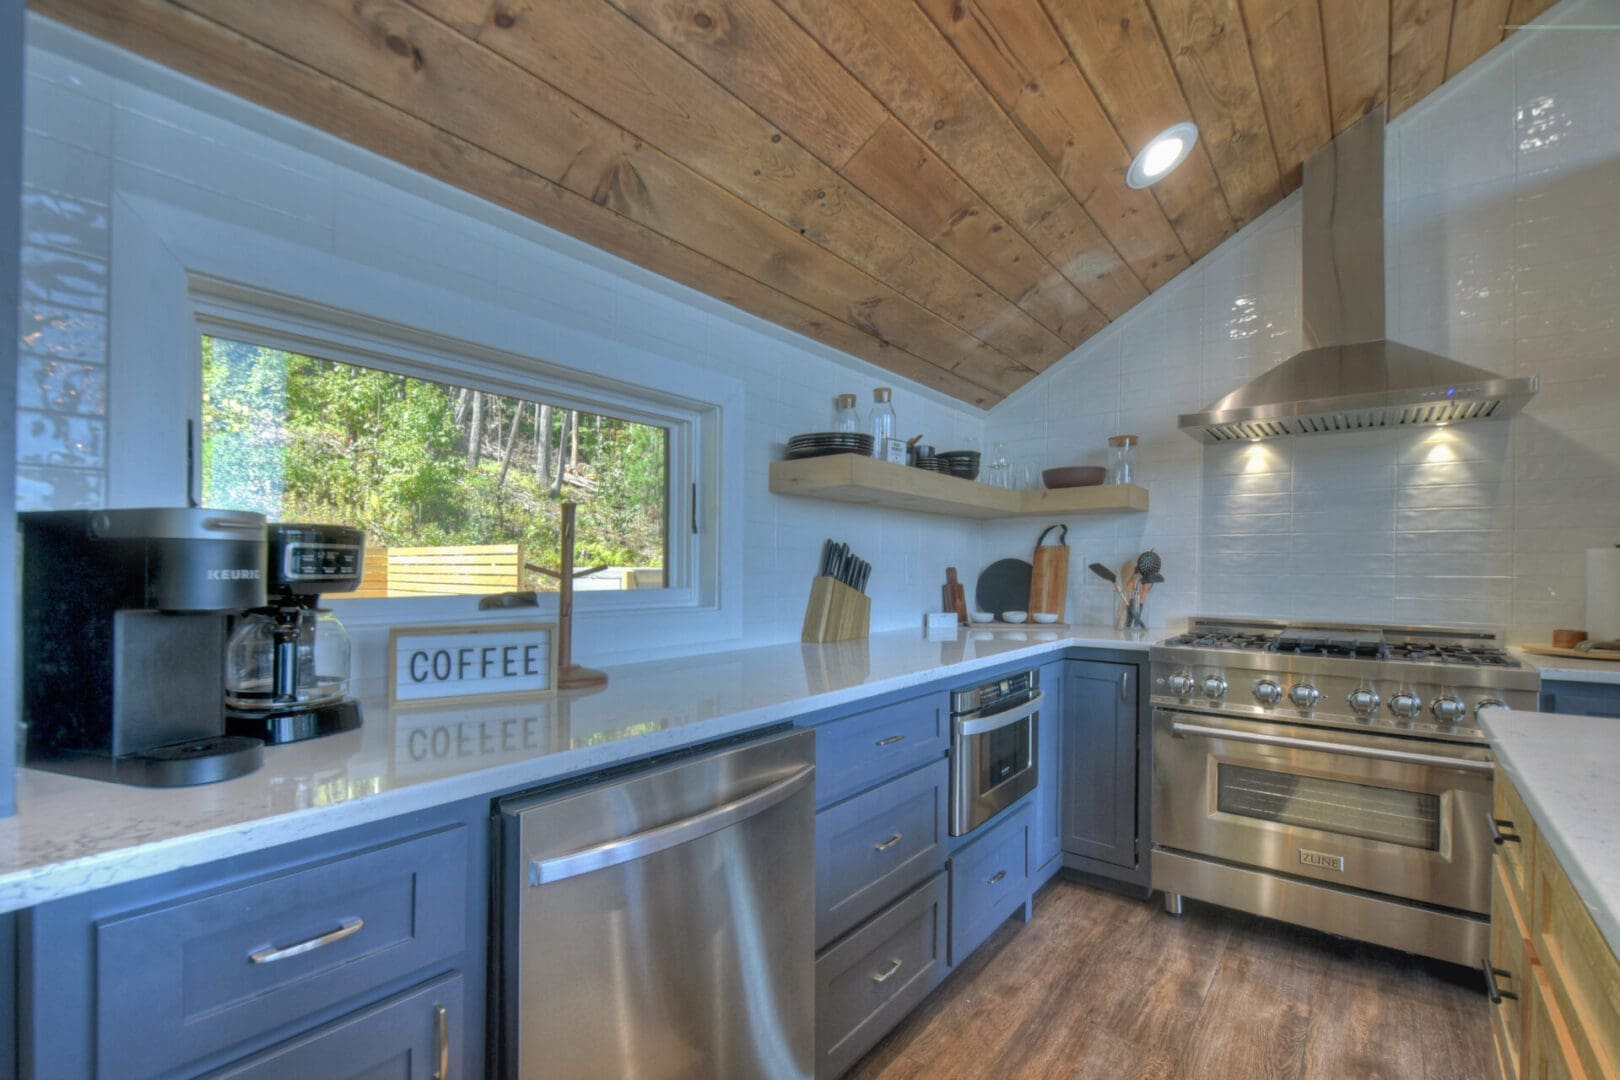 An architectural design services with a kitchen featuring blue cabinets and a wood ceiling.